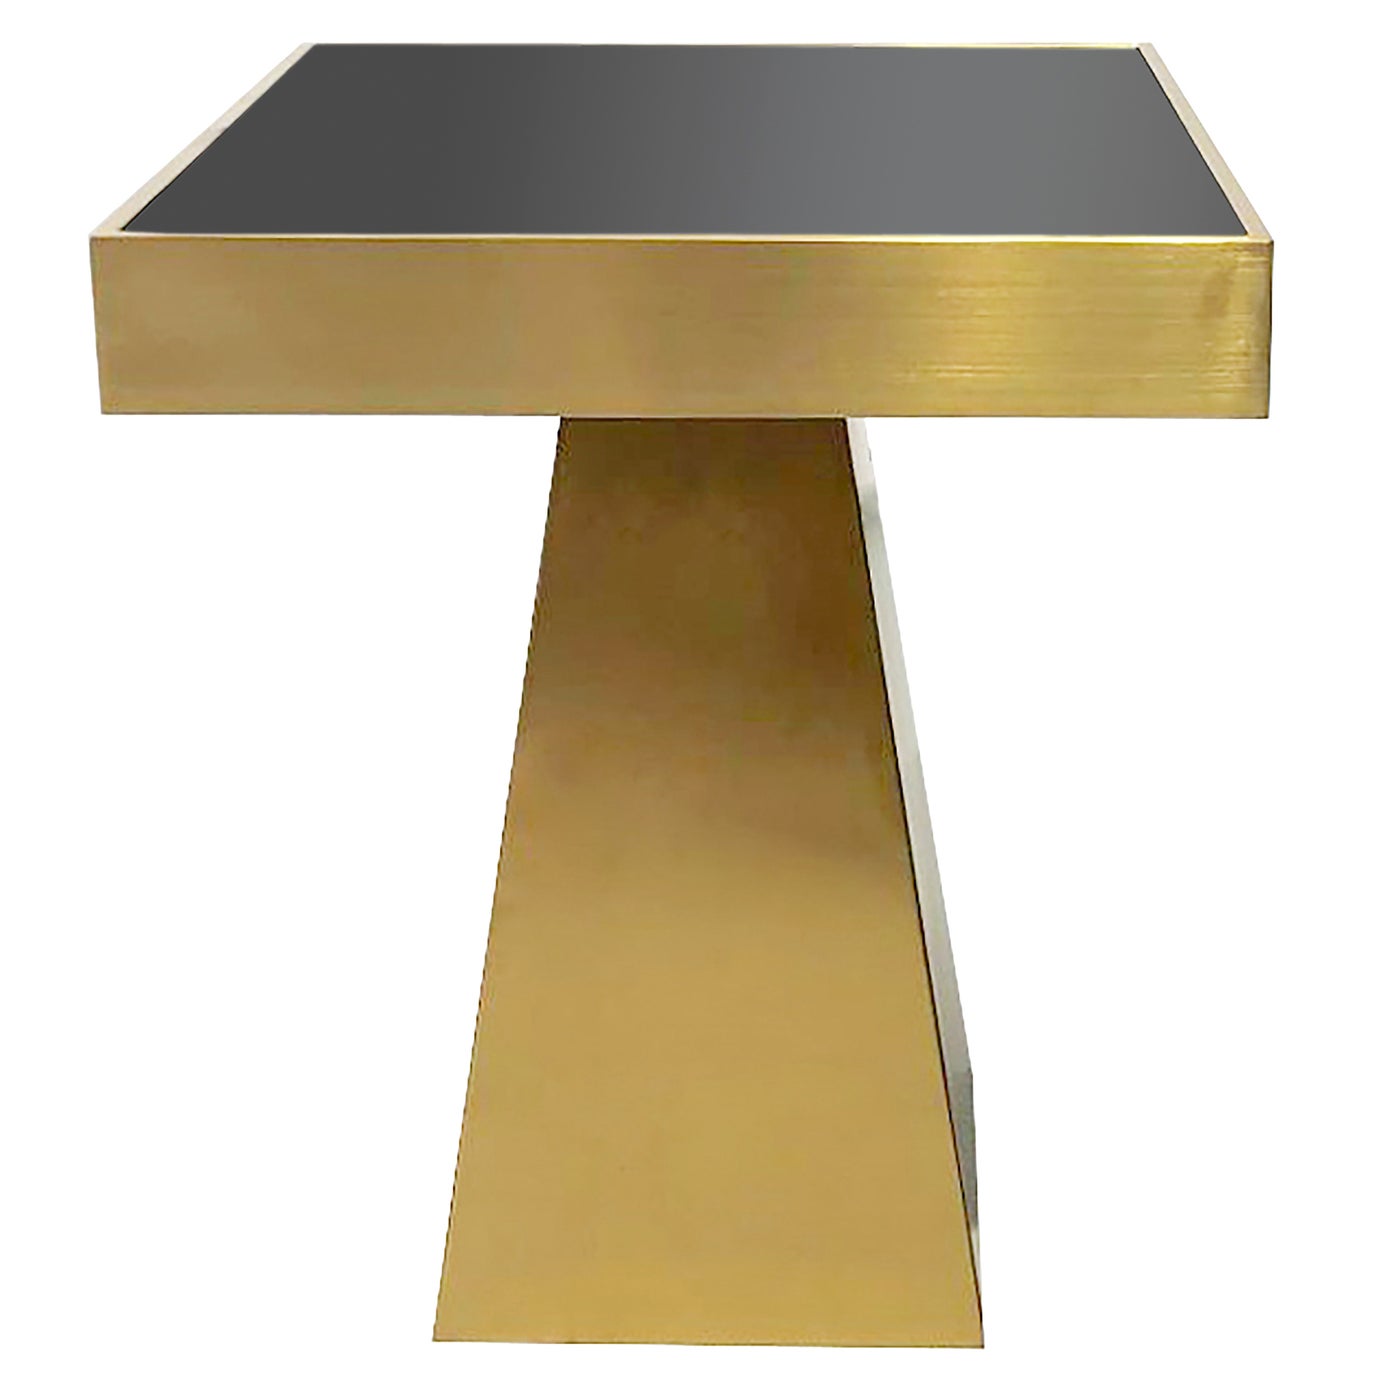 BRYANT END TABLE | Brushed Gold Finish on Metal with Black Glass Top